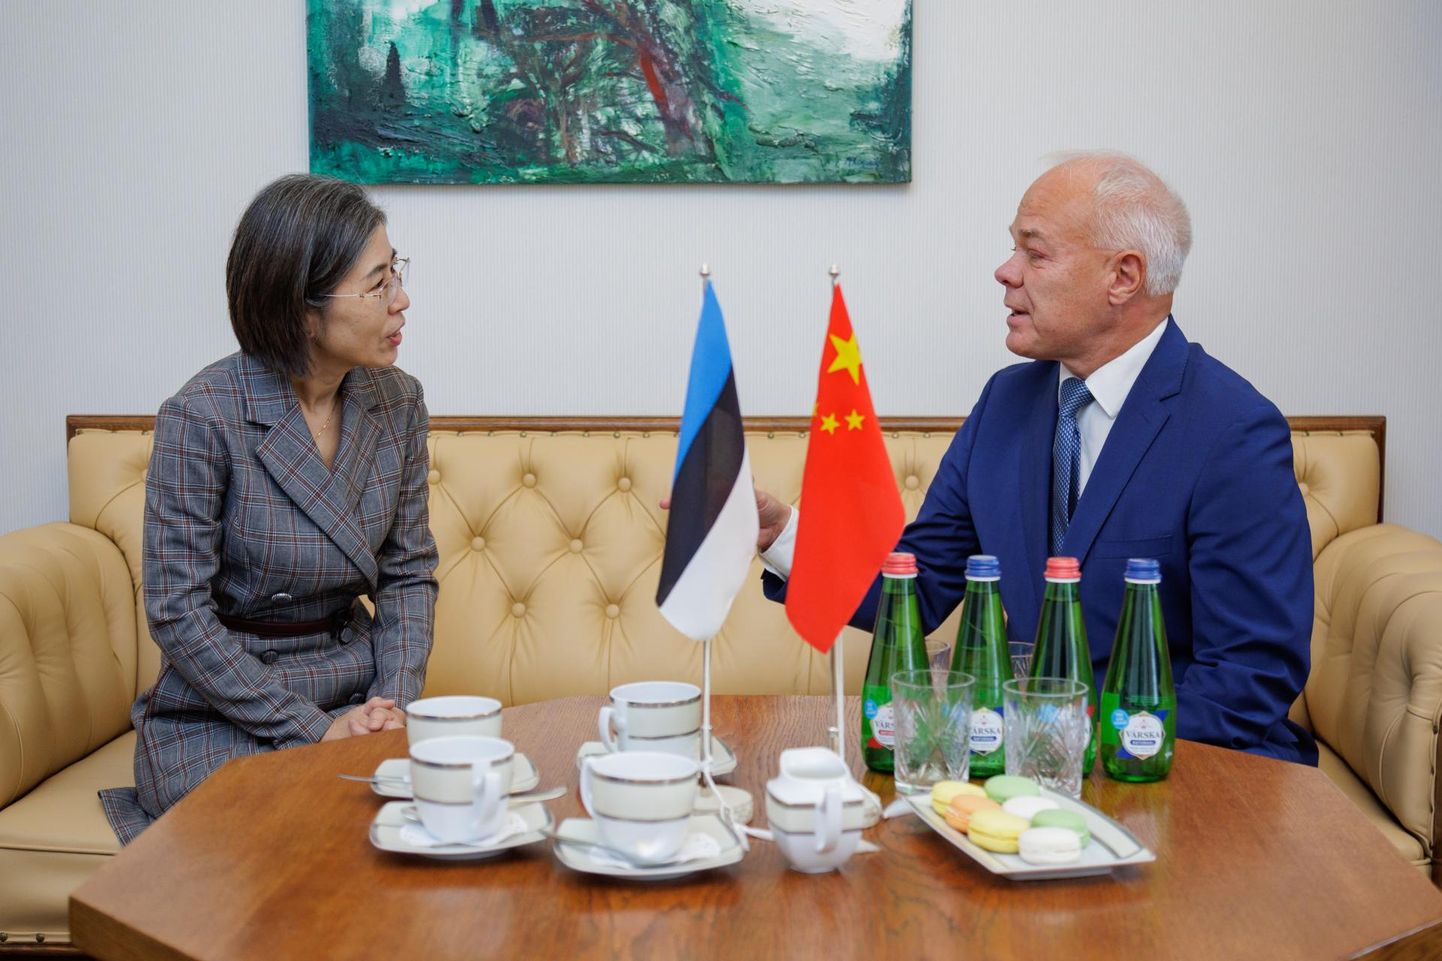 China's ambassador to Estonia, Guo Xiaomei, warned at a meeting with chairman of the Estonia-China parliamentary group Toomas Kivimagi that the opening of a Taipei representative office could lead to her departure from Estonia.